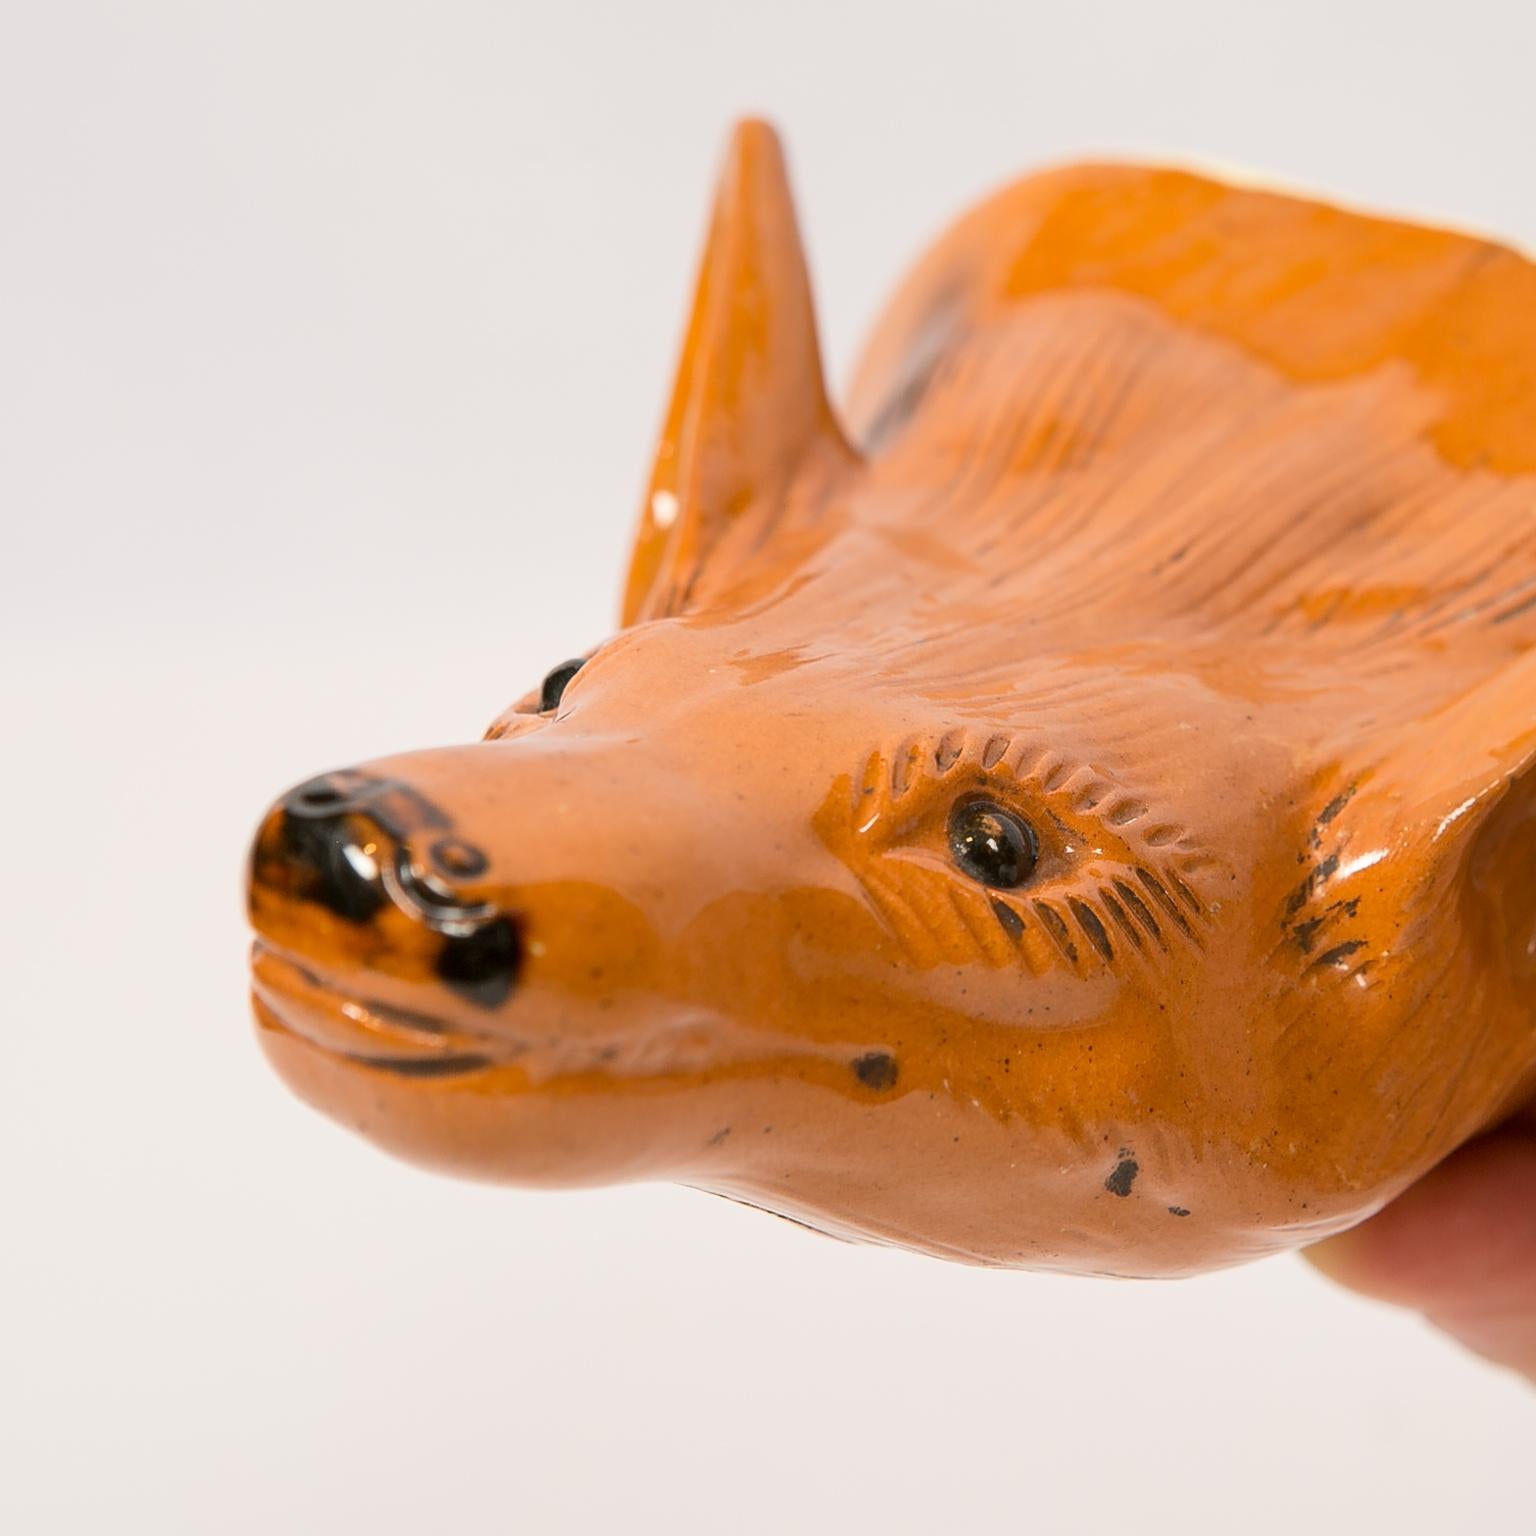 A fine antique Staffordshire pottery fox head stirrup cup. Deaccessioned from Colonial Williamsburg. Made circa 1790. Molded in the style of Ralph Wood, this fox head stirrup cup is painted in bright orange with brown details. Interesting features